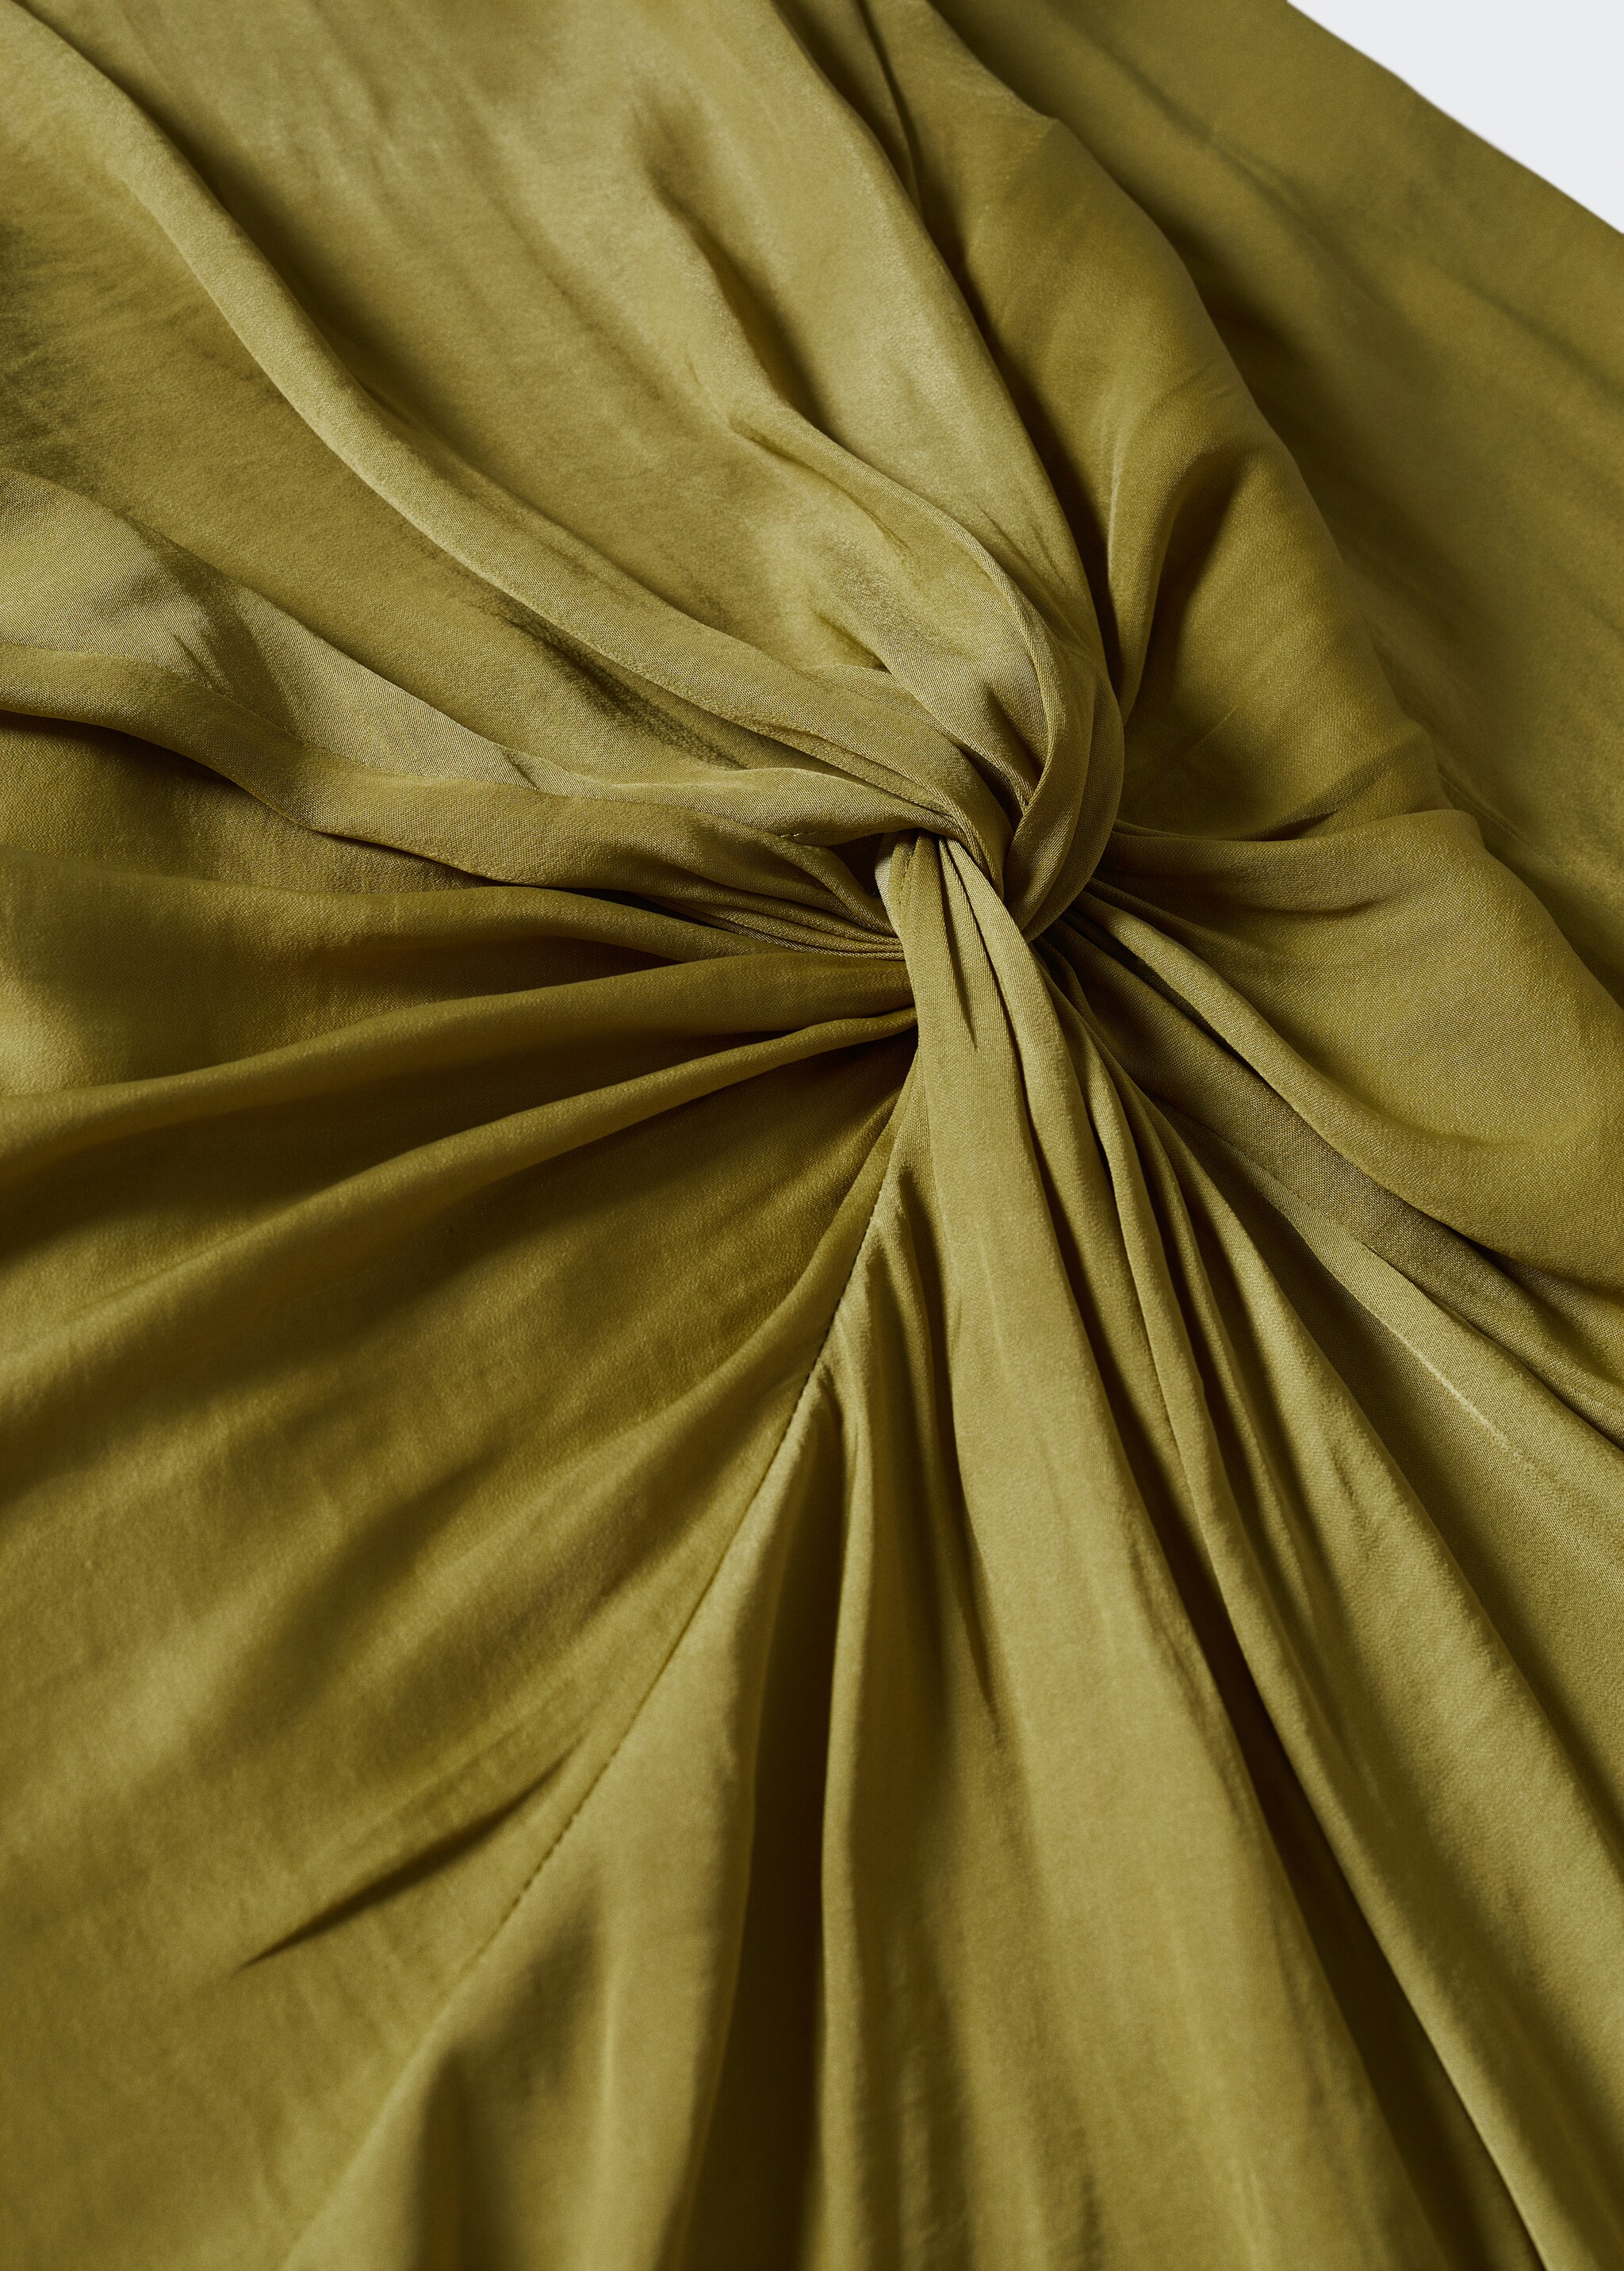 Satin dress with knot - Details of the article 8